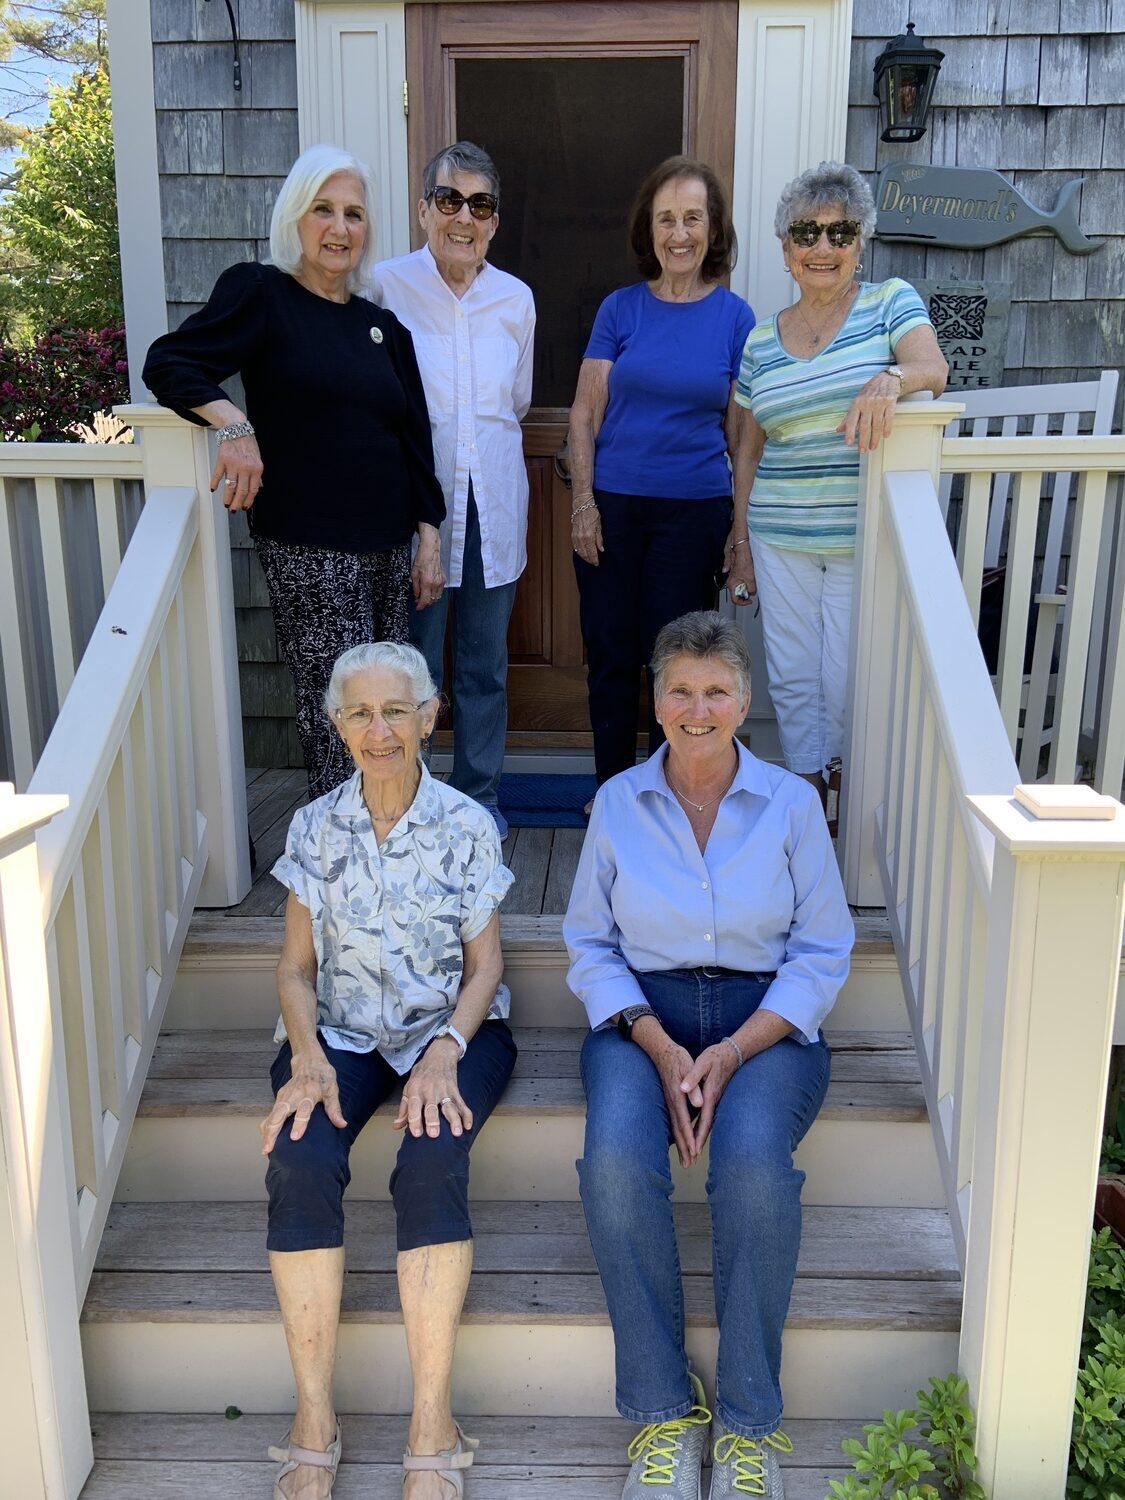 The remaining members of the Sag Harbor Ladies Village Improvement Society decided to disband earlier this year. Seated, from left, Margaret Bromberg and Bethany Deyermond. Standing, from left, Roseann Bucking, Diane Lewis, Chris Tice and Deanna Lattanzio. STEPHEN J. KOTZ